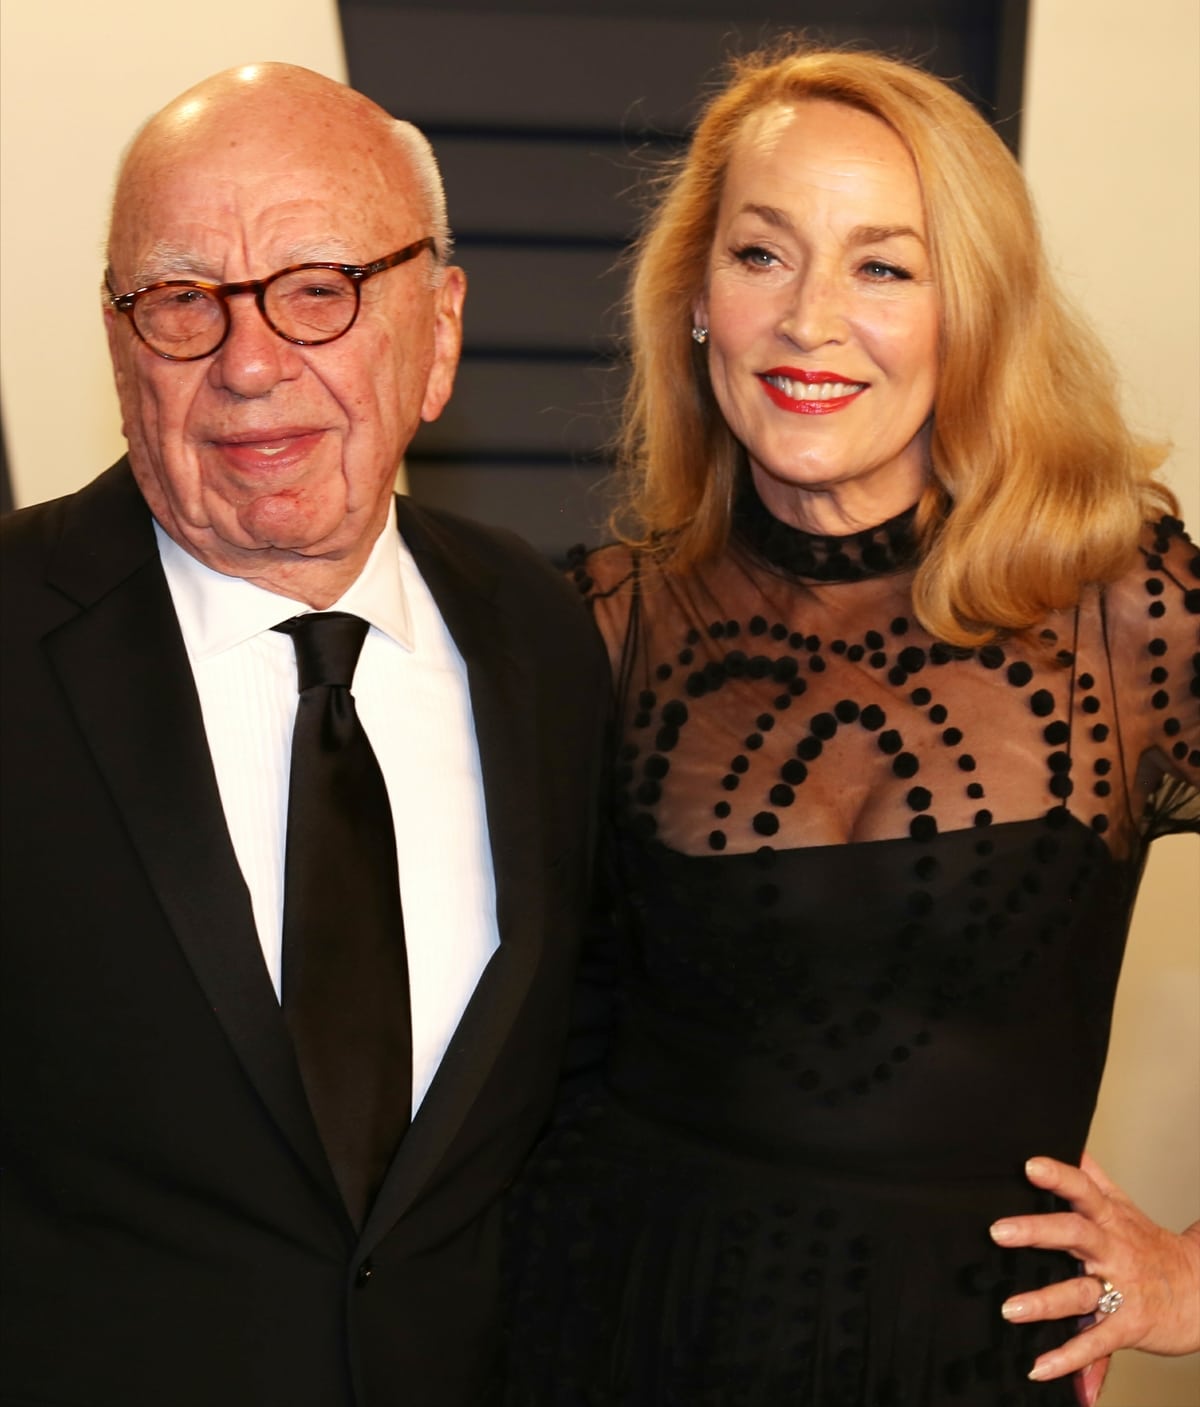 Rupert Murdoch and Jerry Hall filed for divorce in June 2022 after six years of marriage